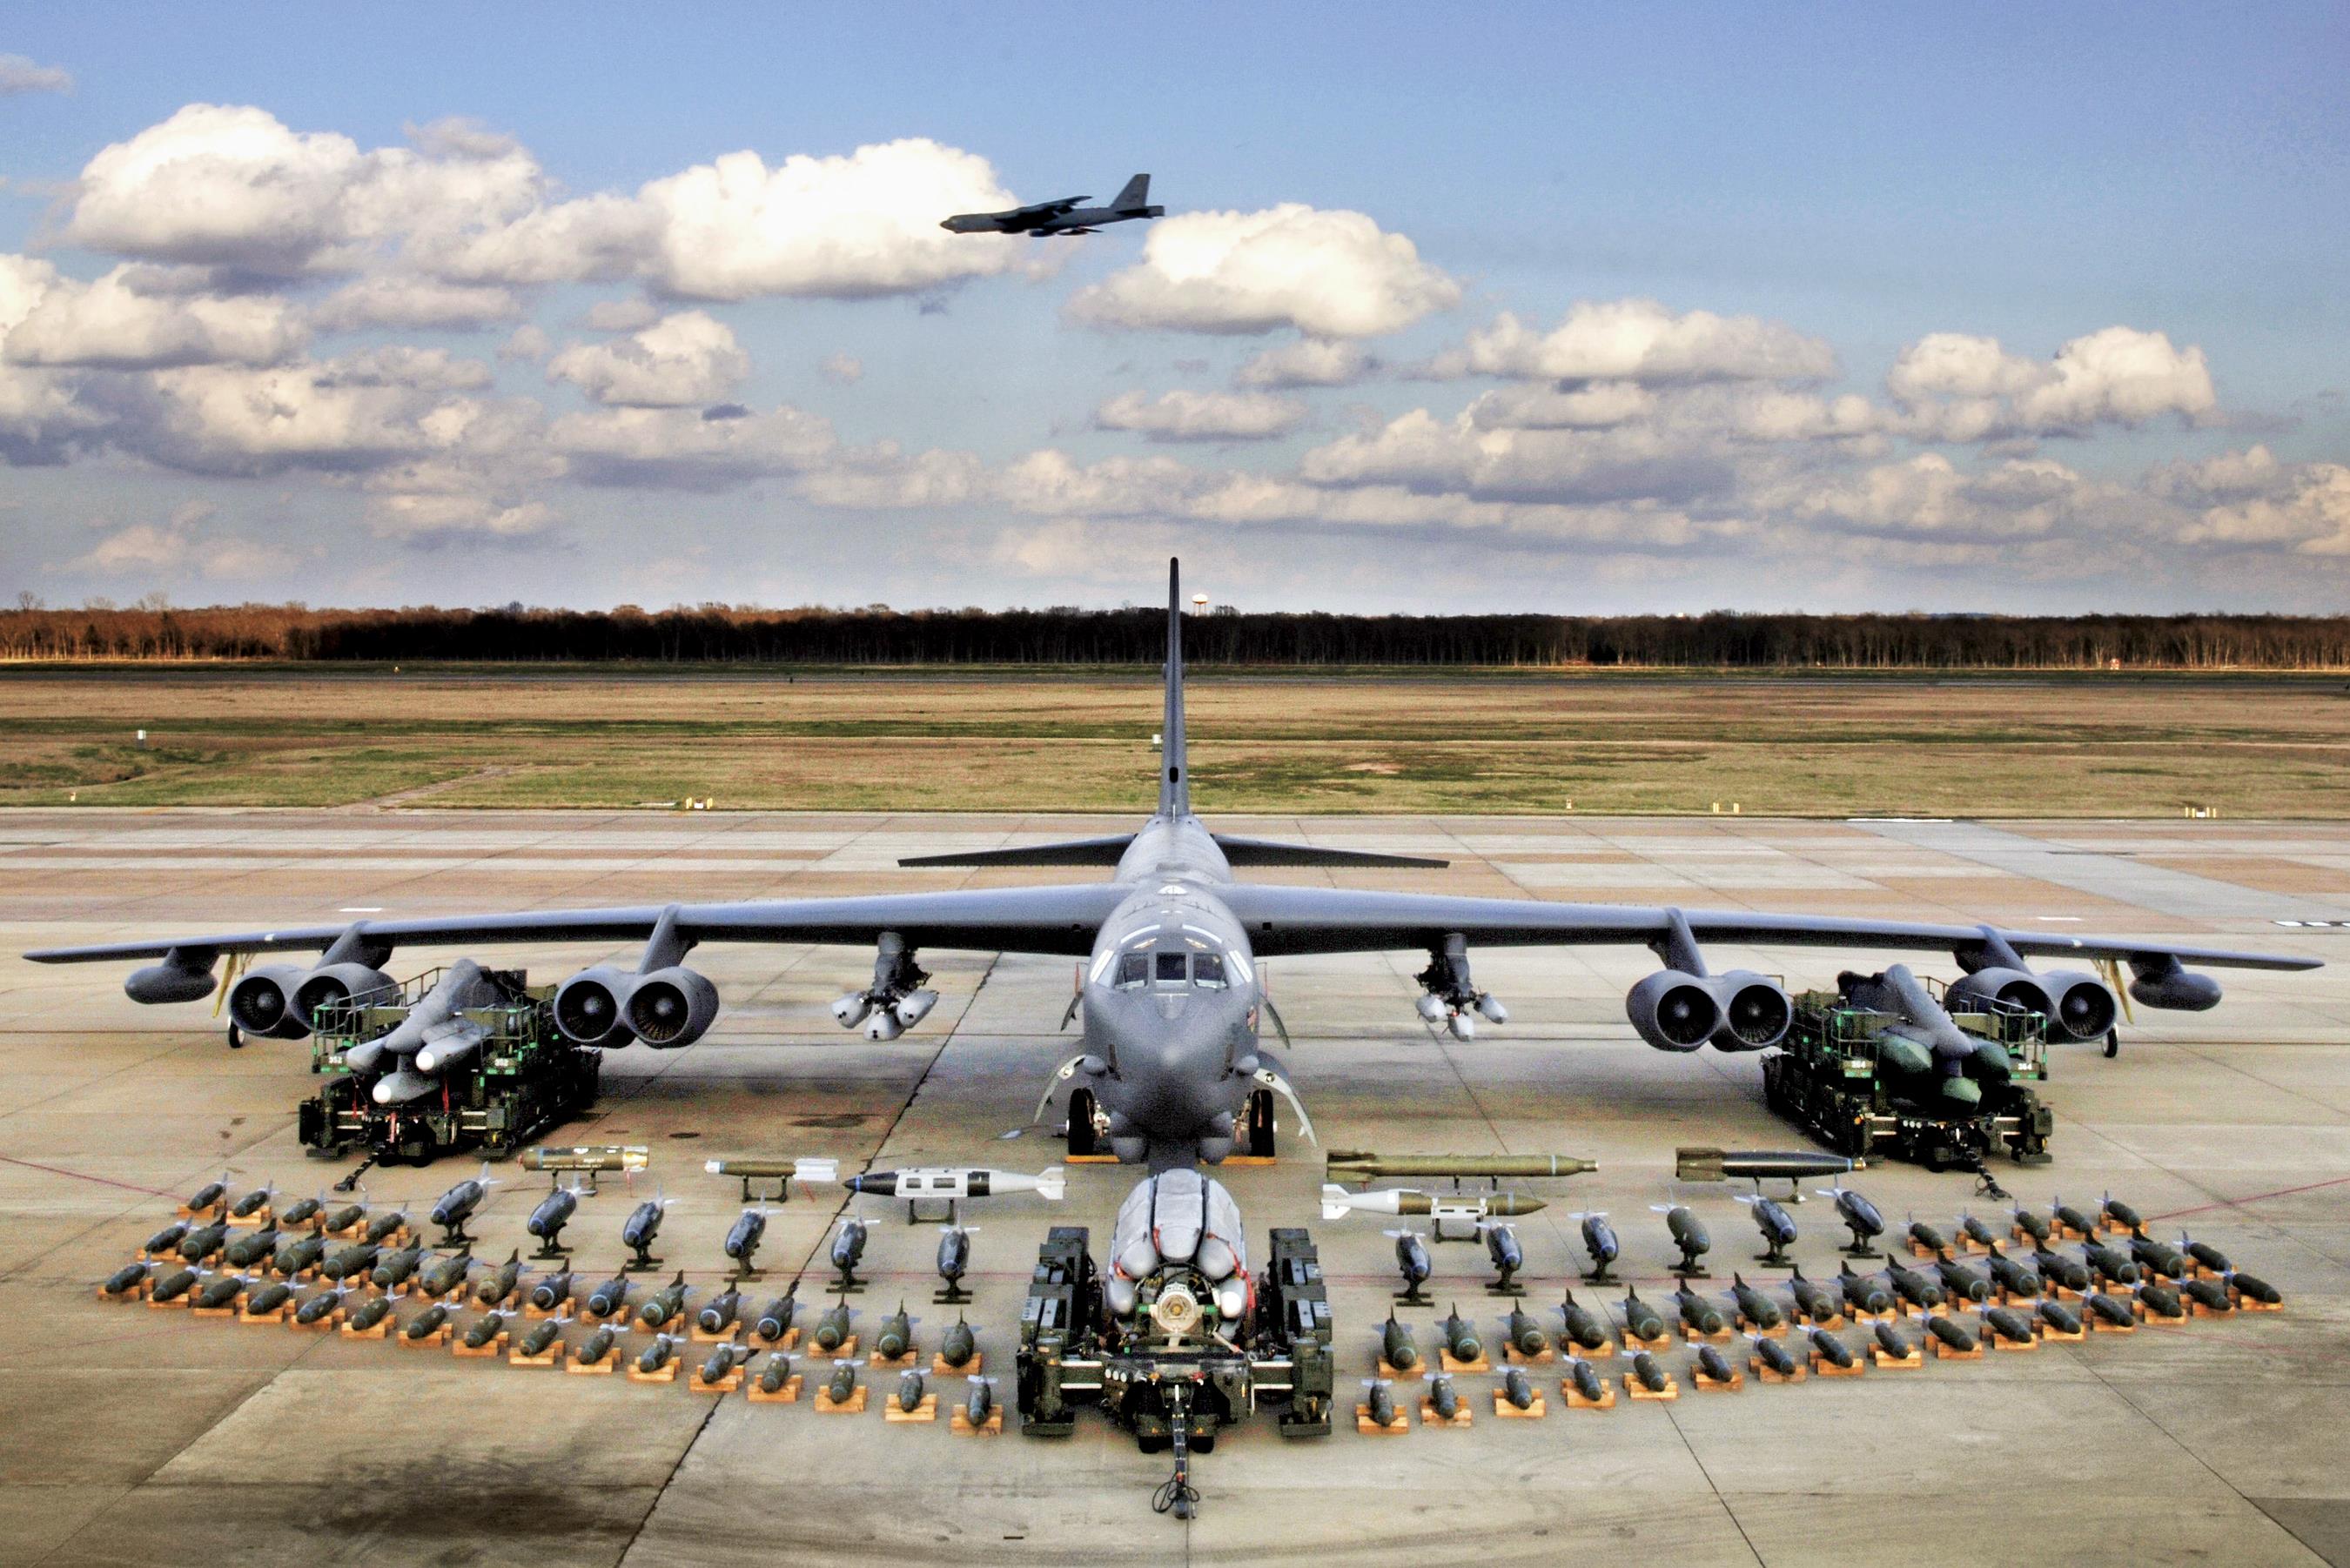 A munitions display demonstrates the full capabilities of the B-52 Stratofortress